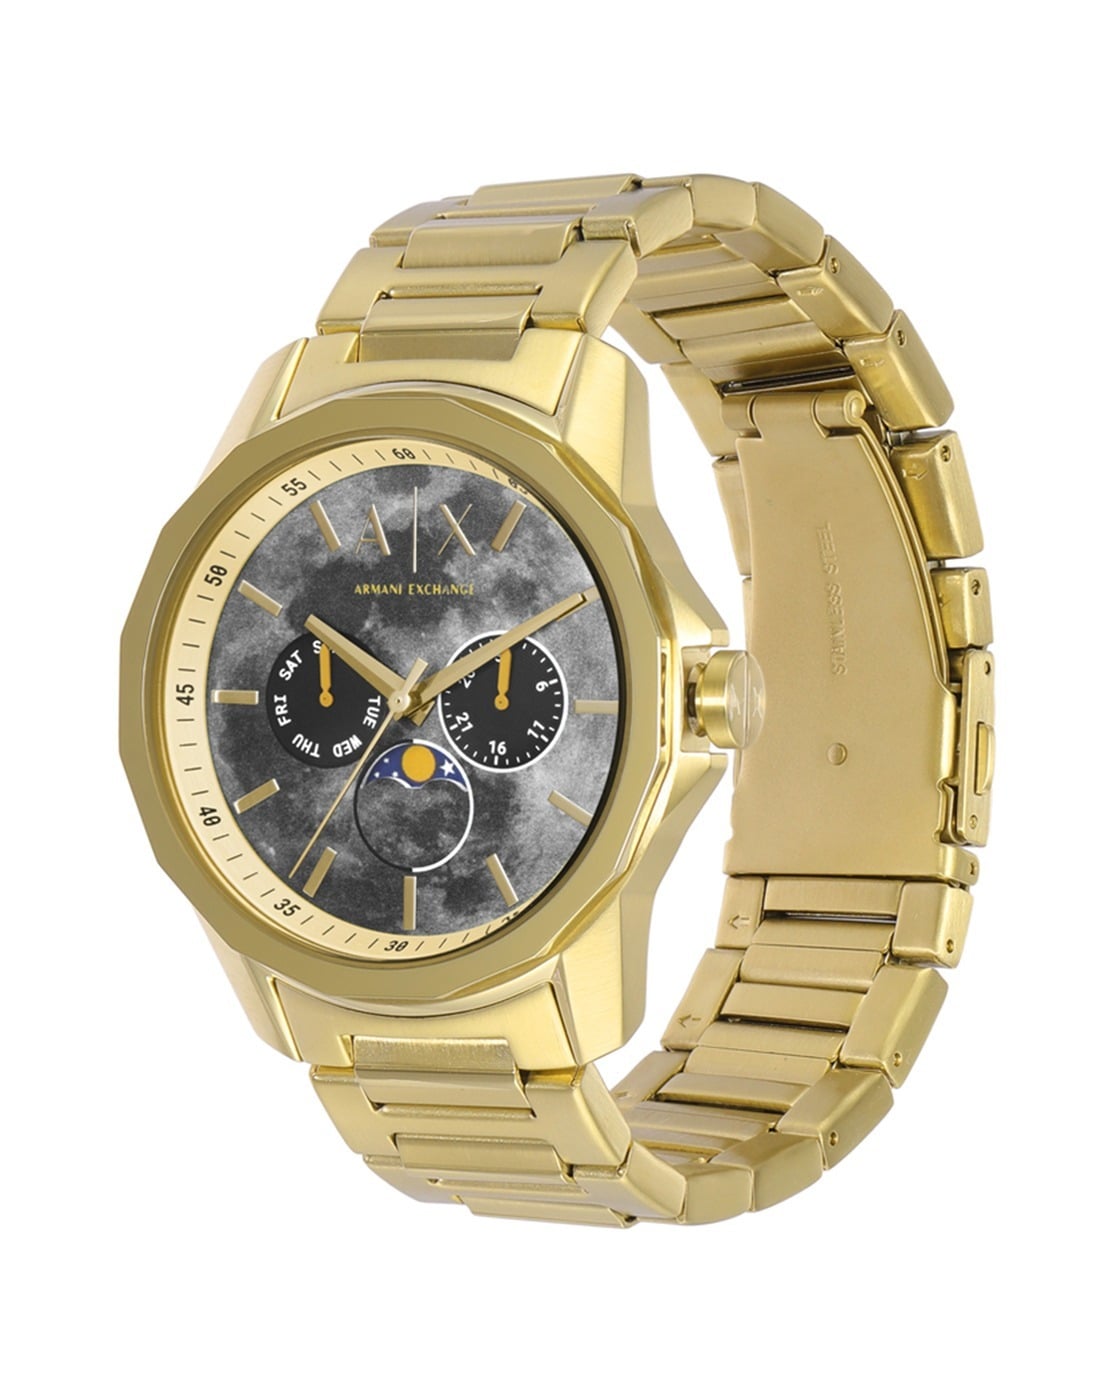 Buy Gold-Toned Watches for Online Men ARMANI by EXCHANGE